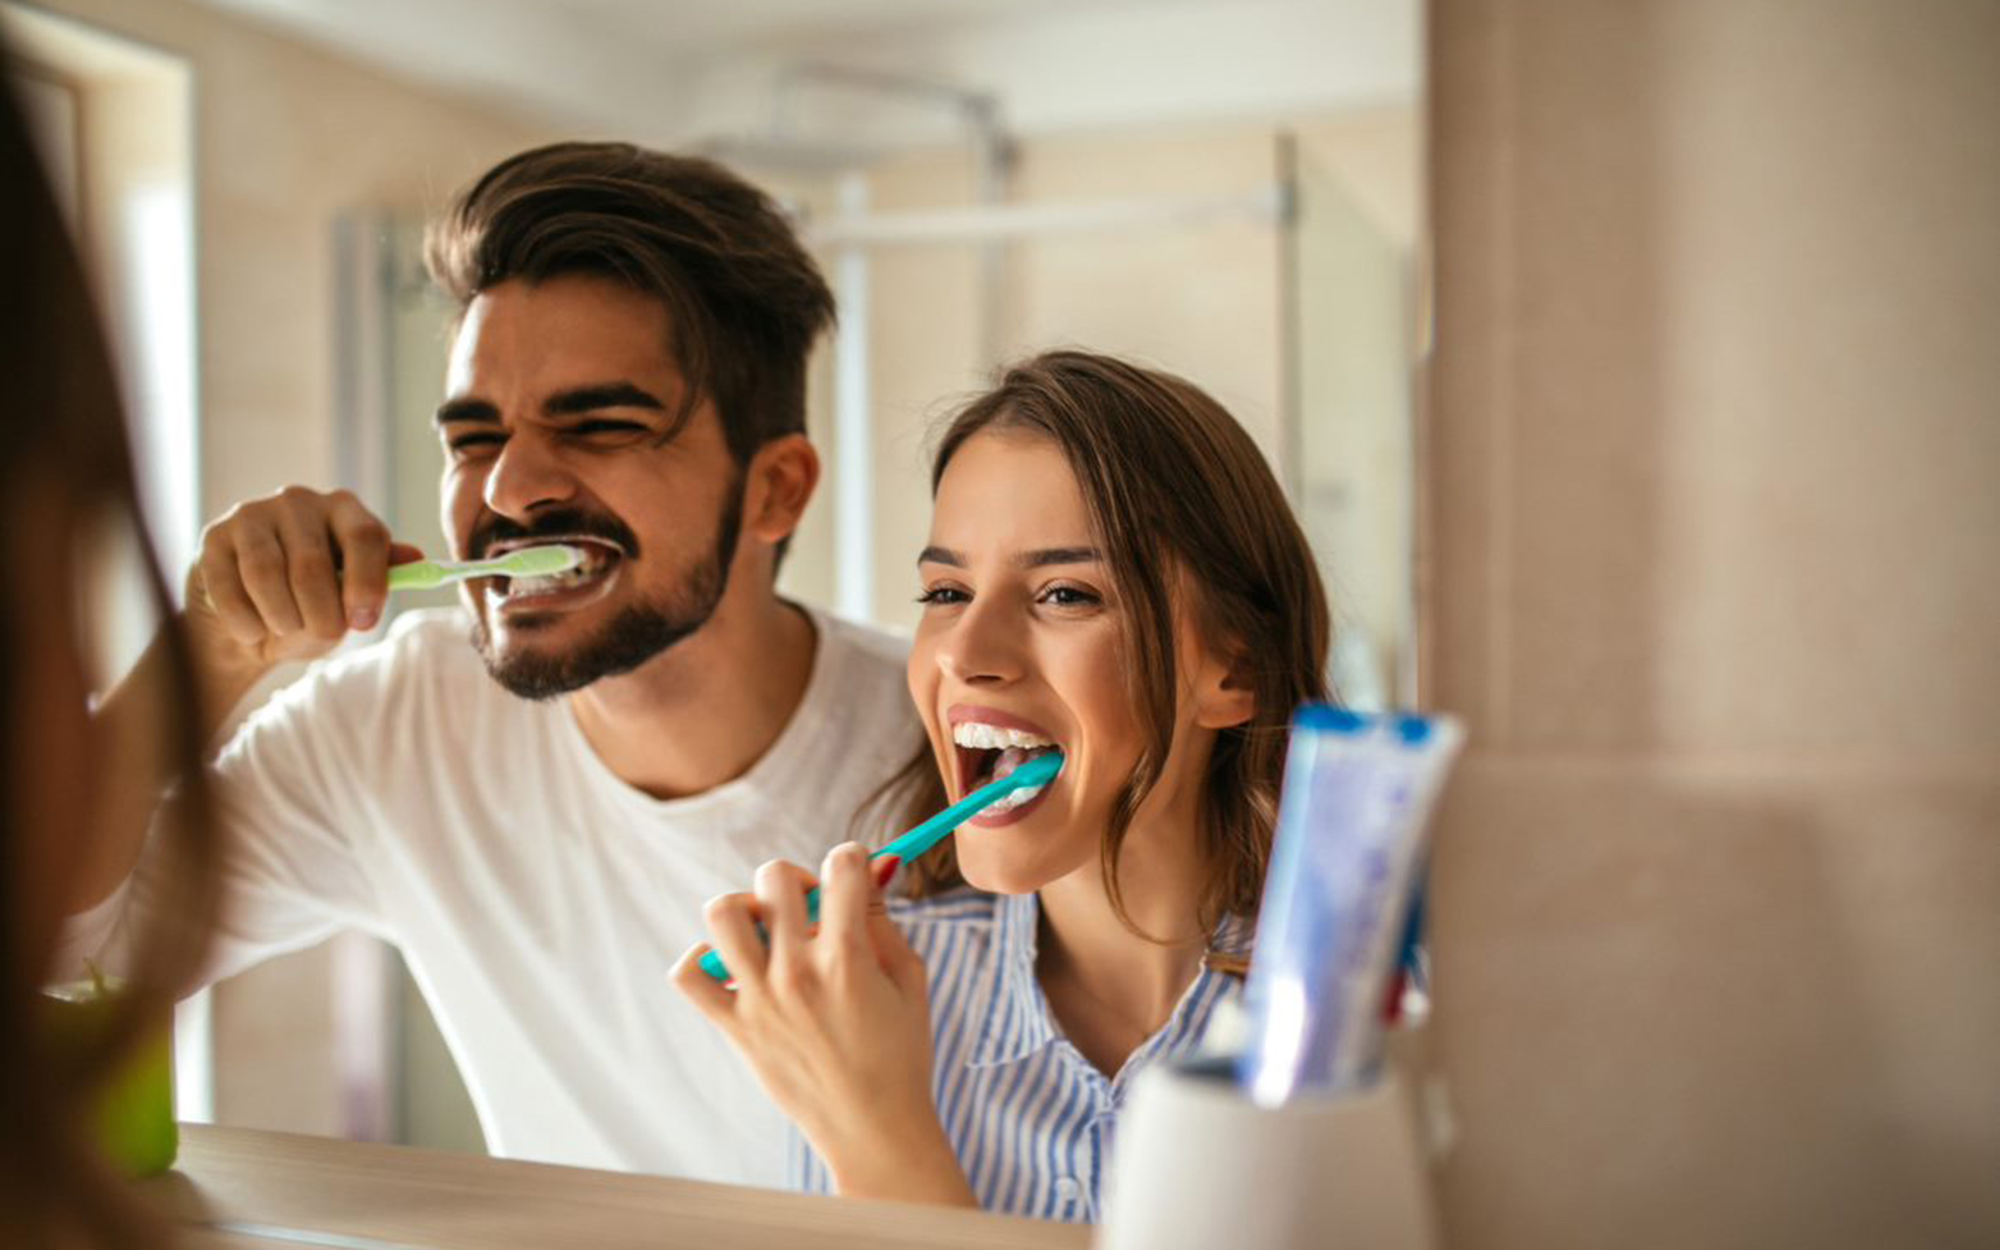 A man and a woman brushing their teeth in the mirror